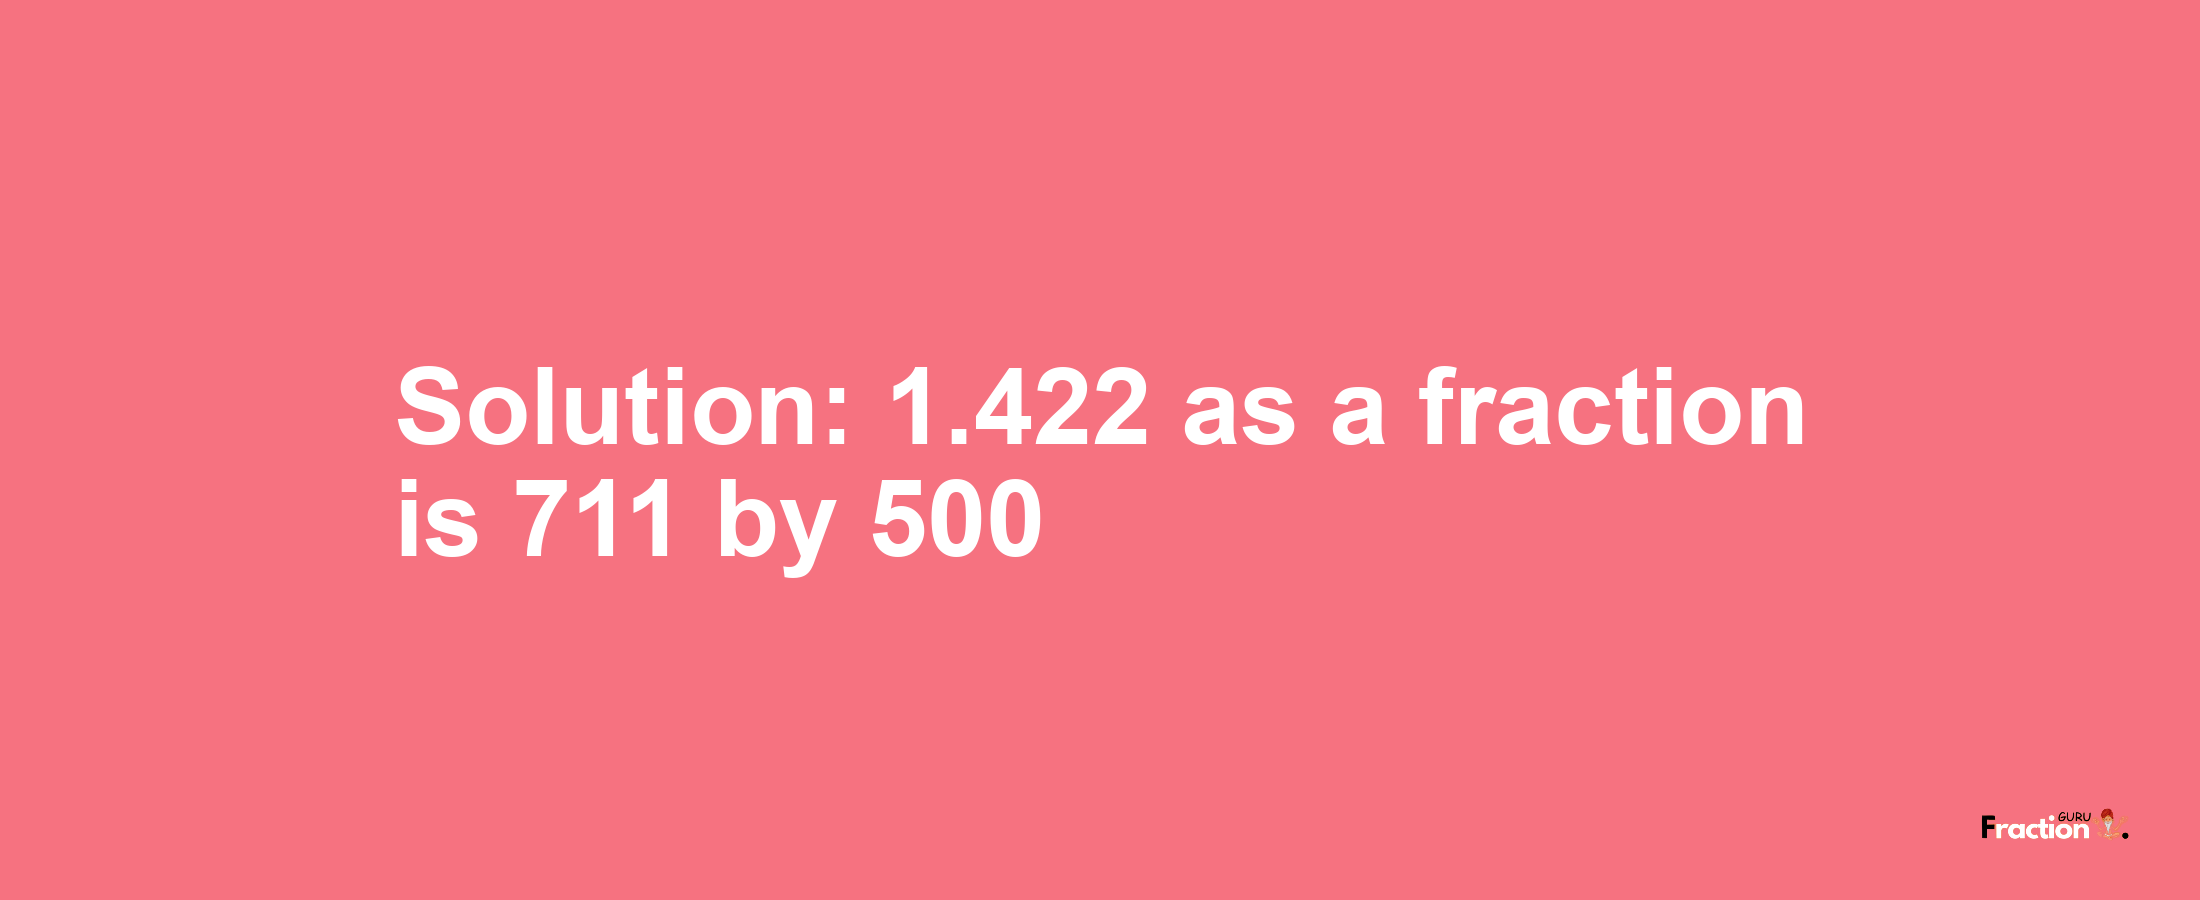 Solution:1.422 as a fraction is 711/500